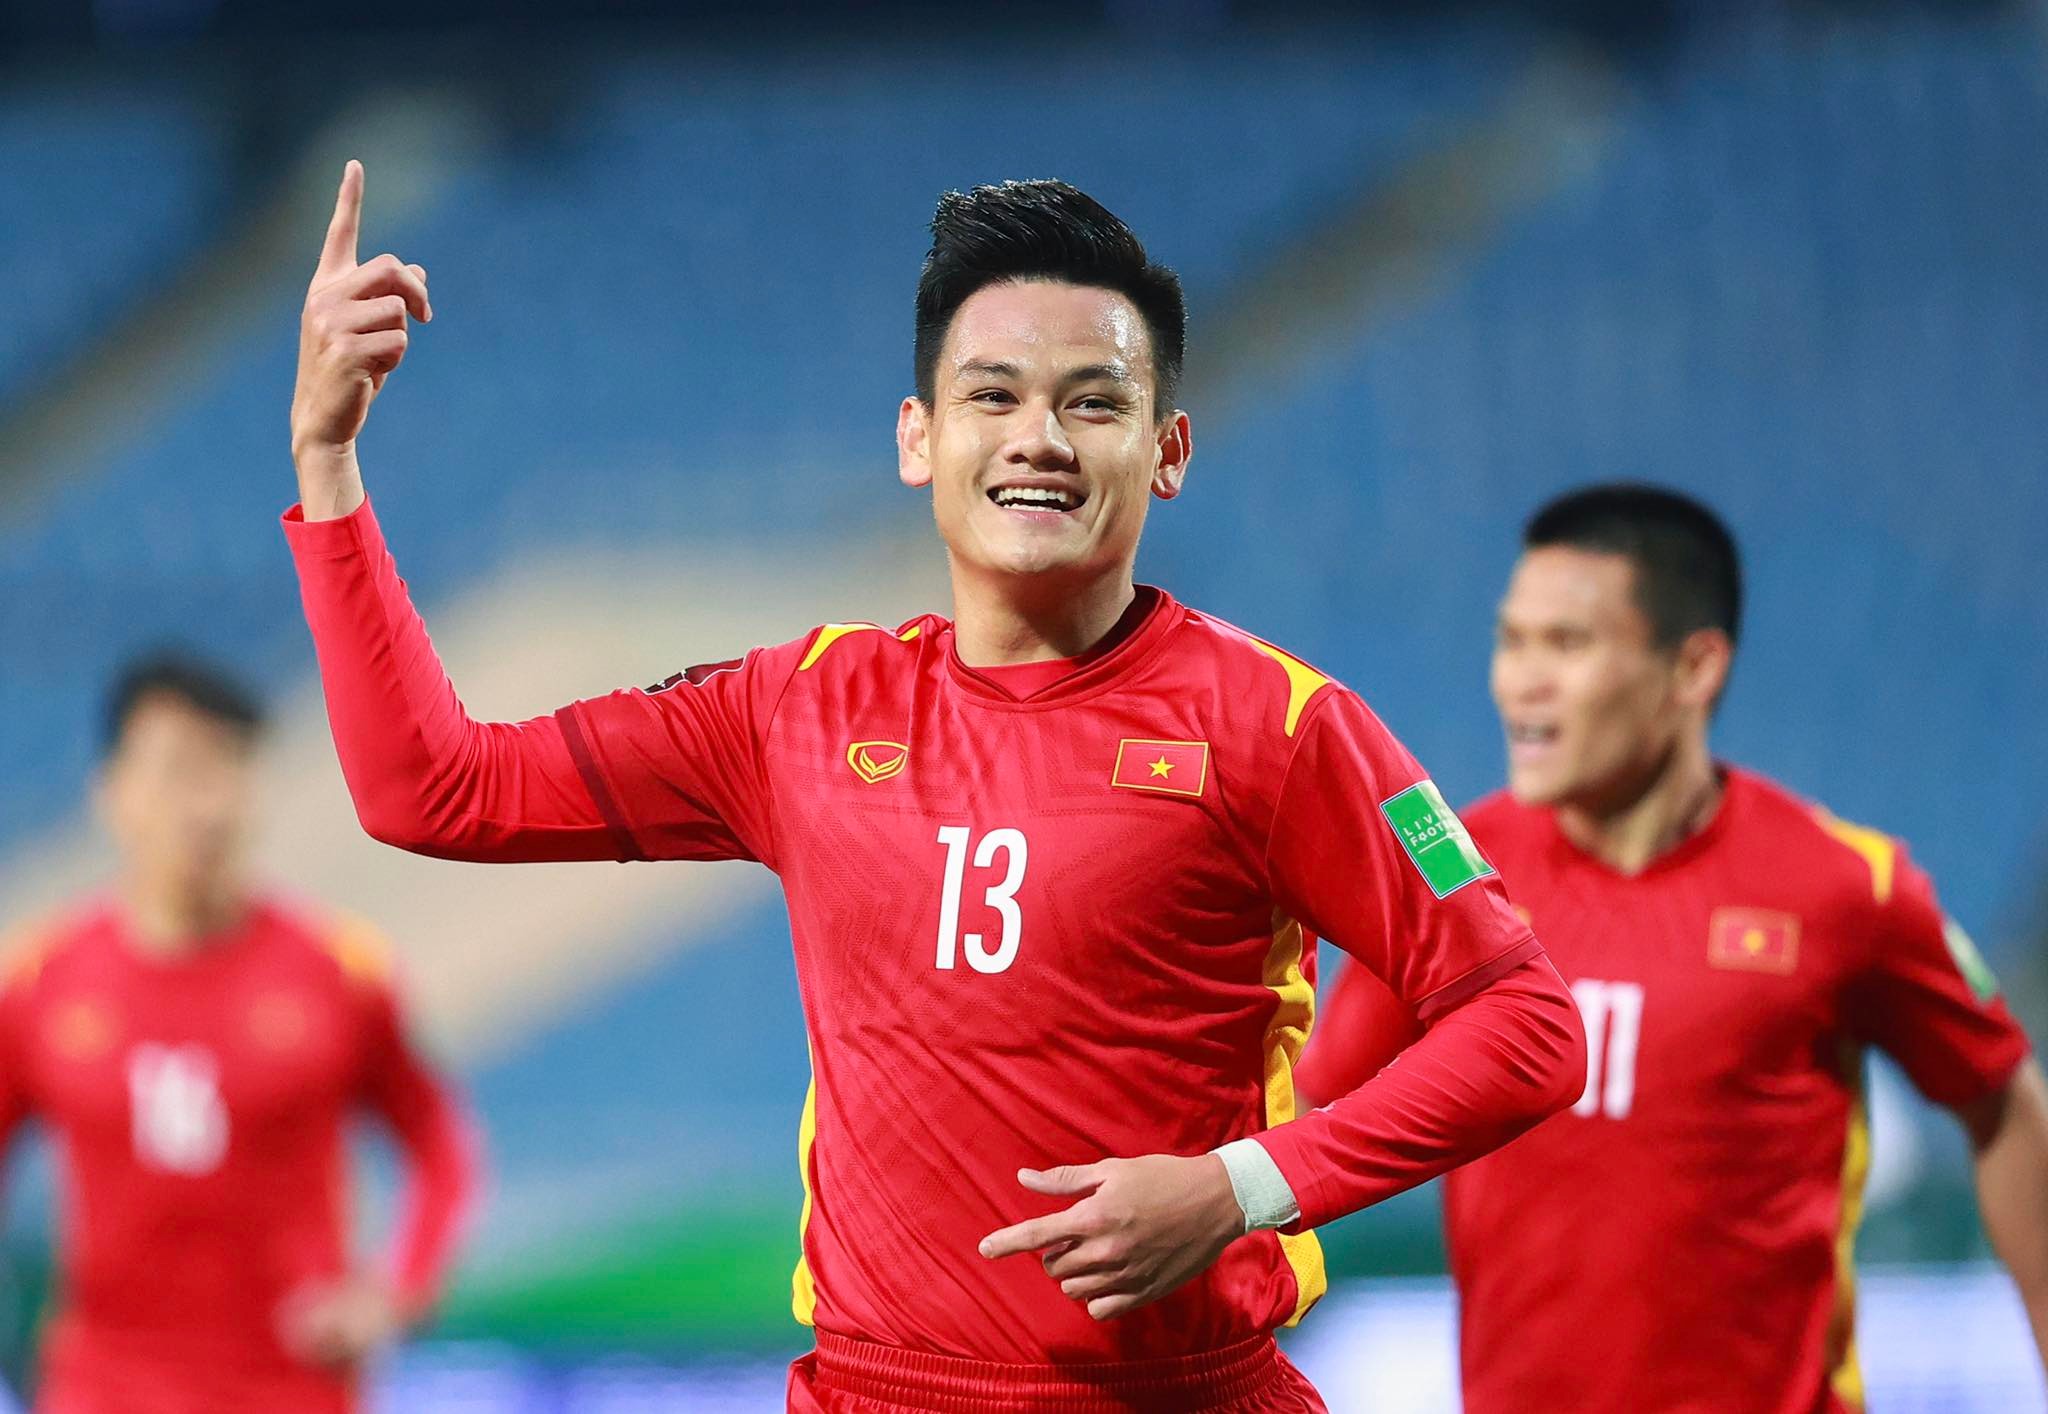 Ho Tan Tai reacts after scoring the first goal for Vietnam in their 2022 FIFA World Cup Asian qualifier against China in Hanoi, February 1, 2022. Photo: Nguyen Khanh / Tuoi Tre